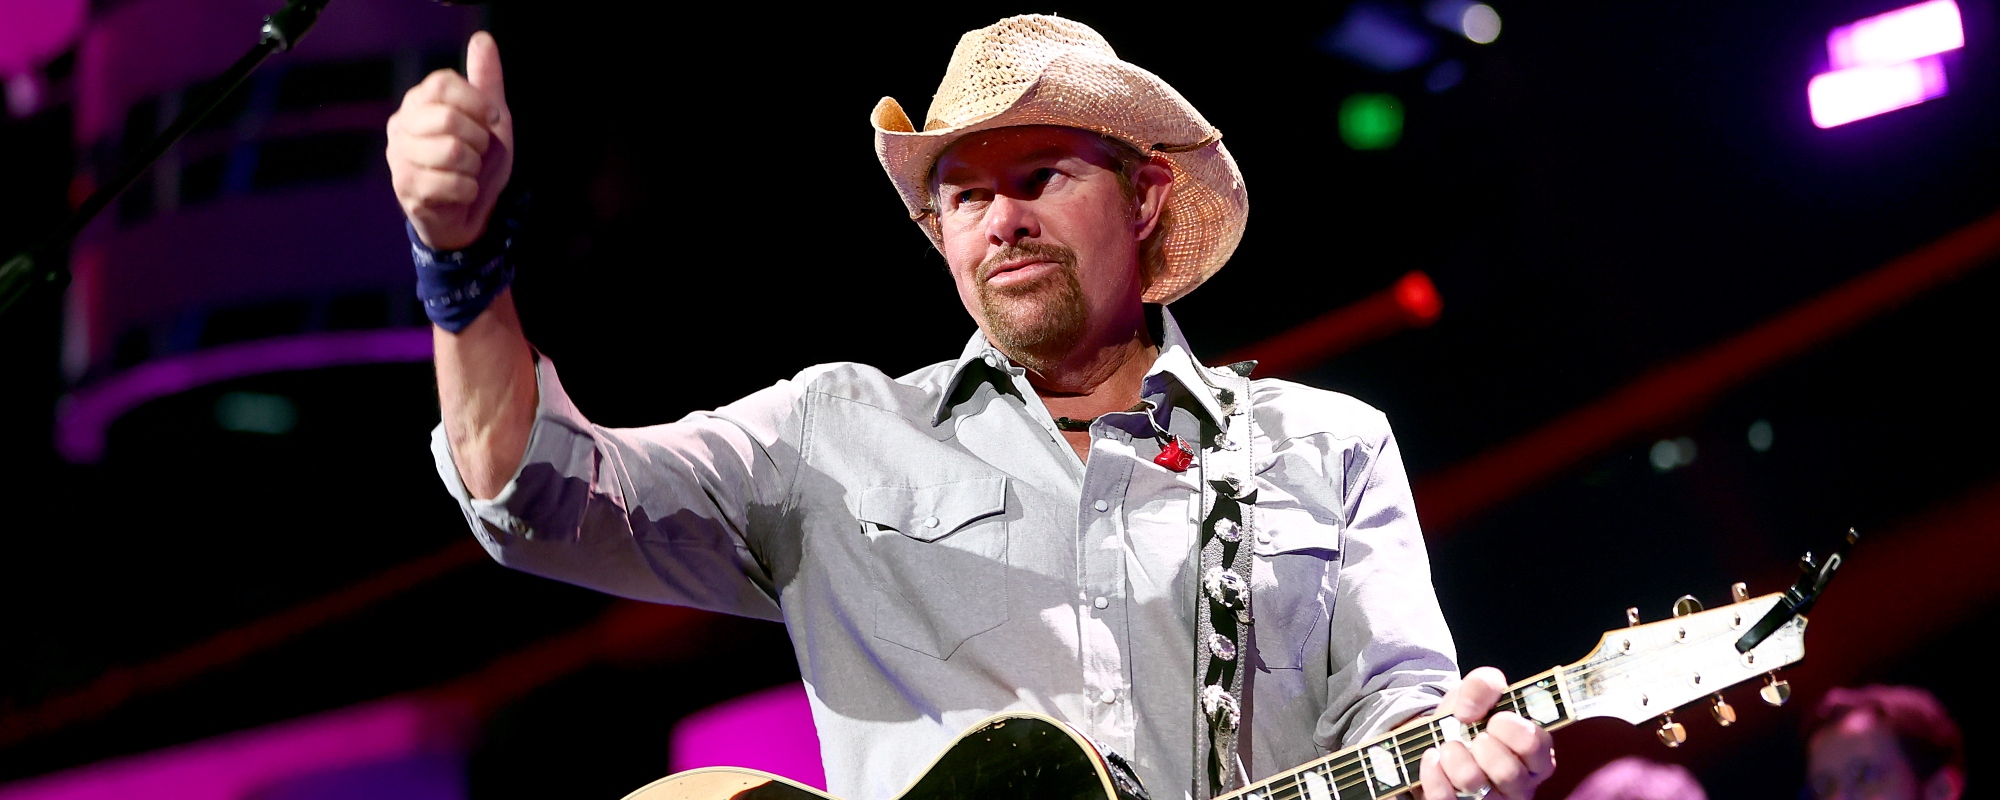 Toby Keith Fans Emotionally Torn Over Posthumous Country Music Hall of Fame Induction